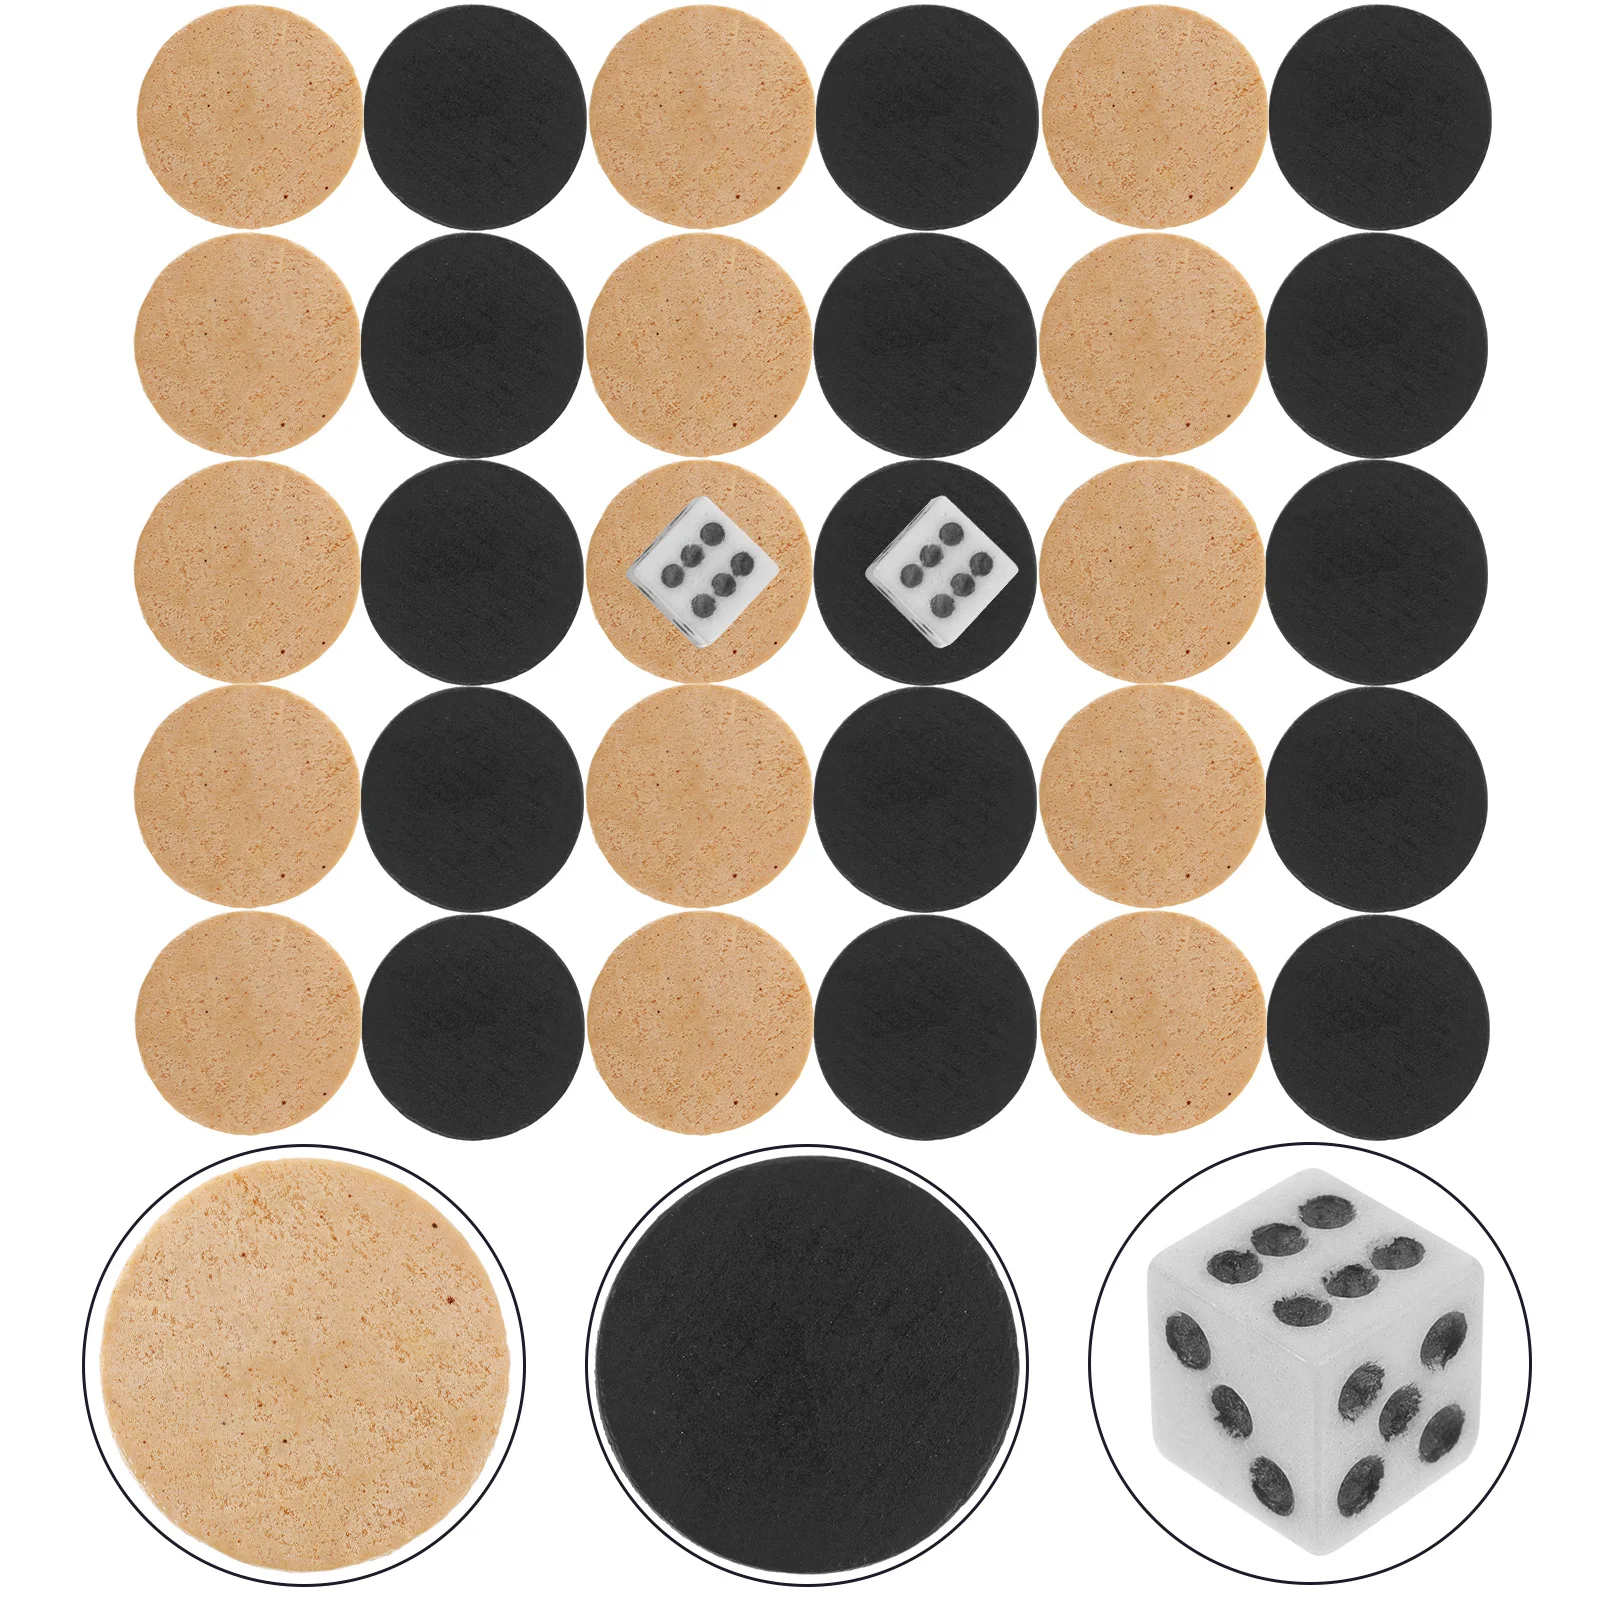 

Wooden Draughts Backgammon Black White Chess Pieces Unique Chess for Draughts Checkers for Creative Simple Gifts for Play